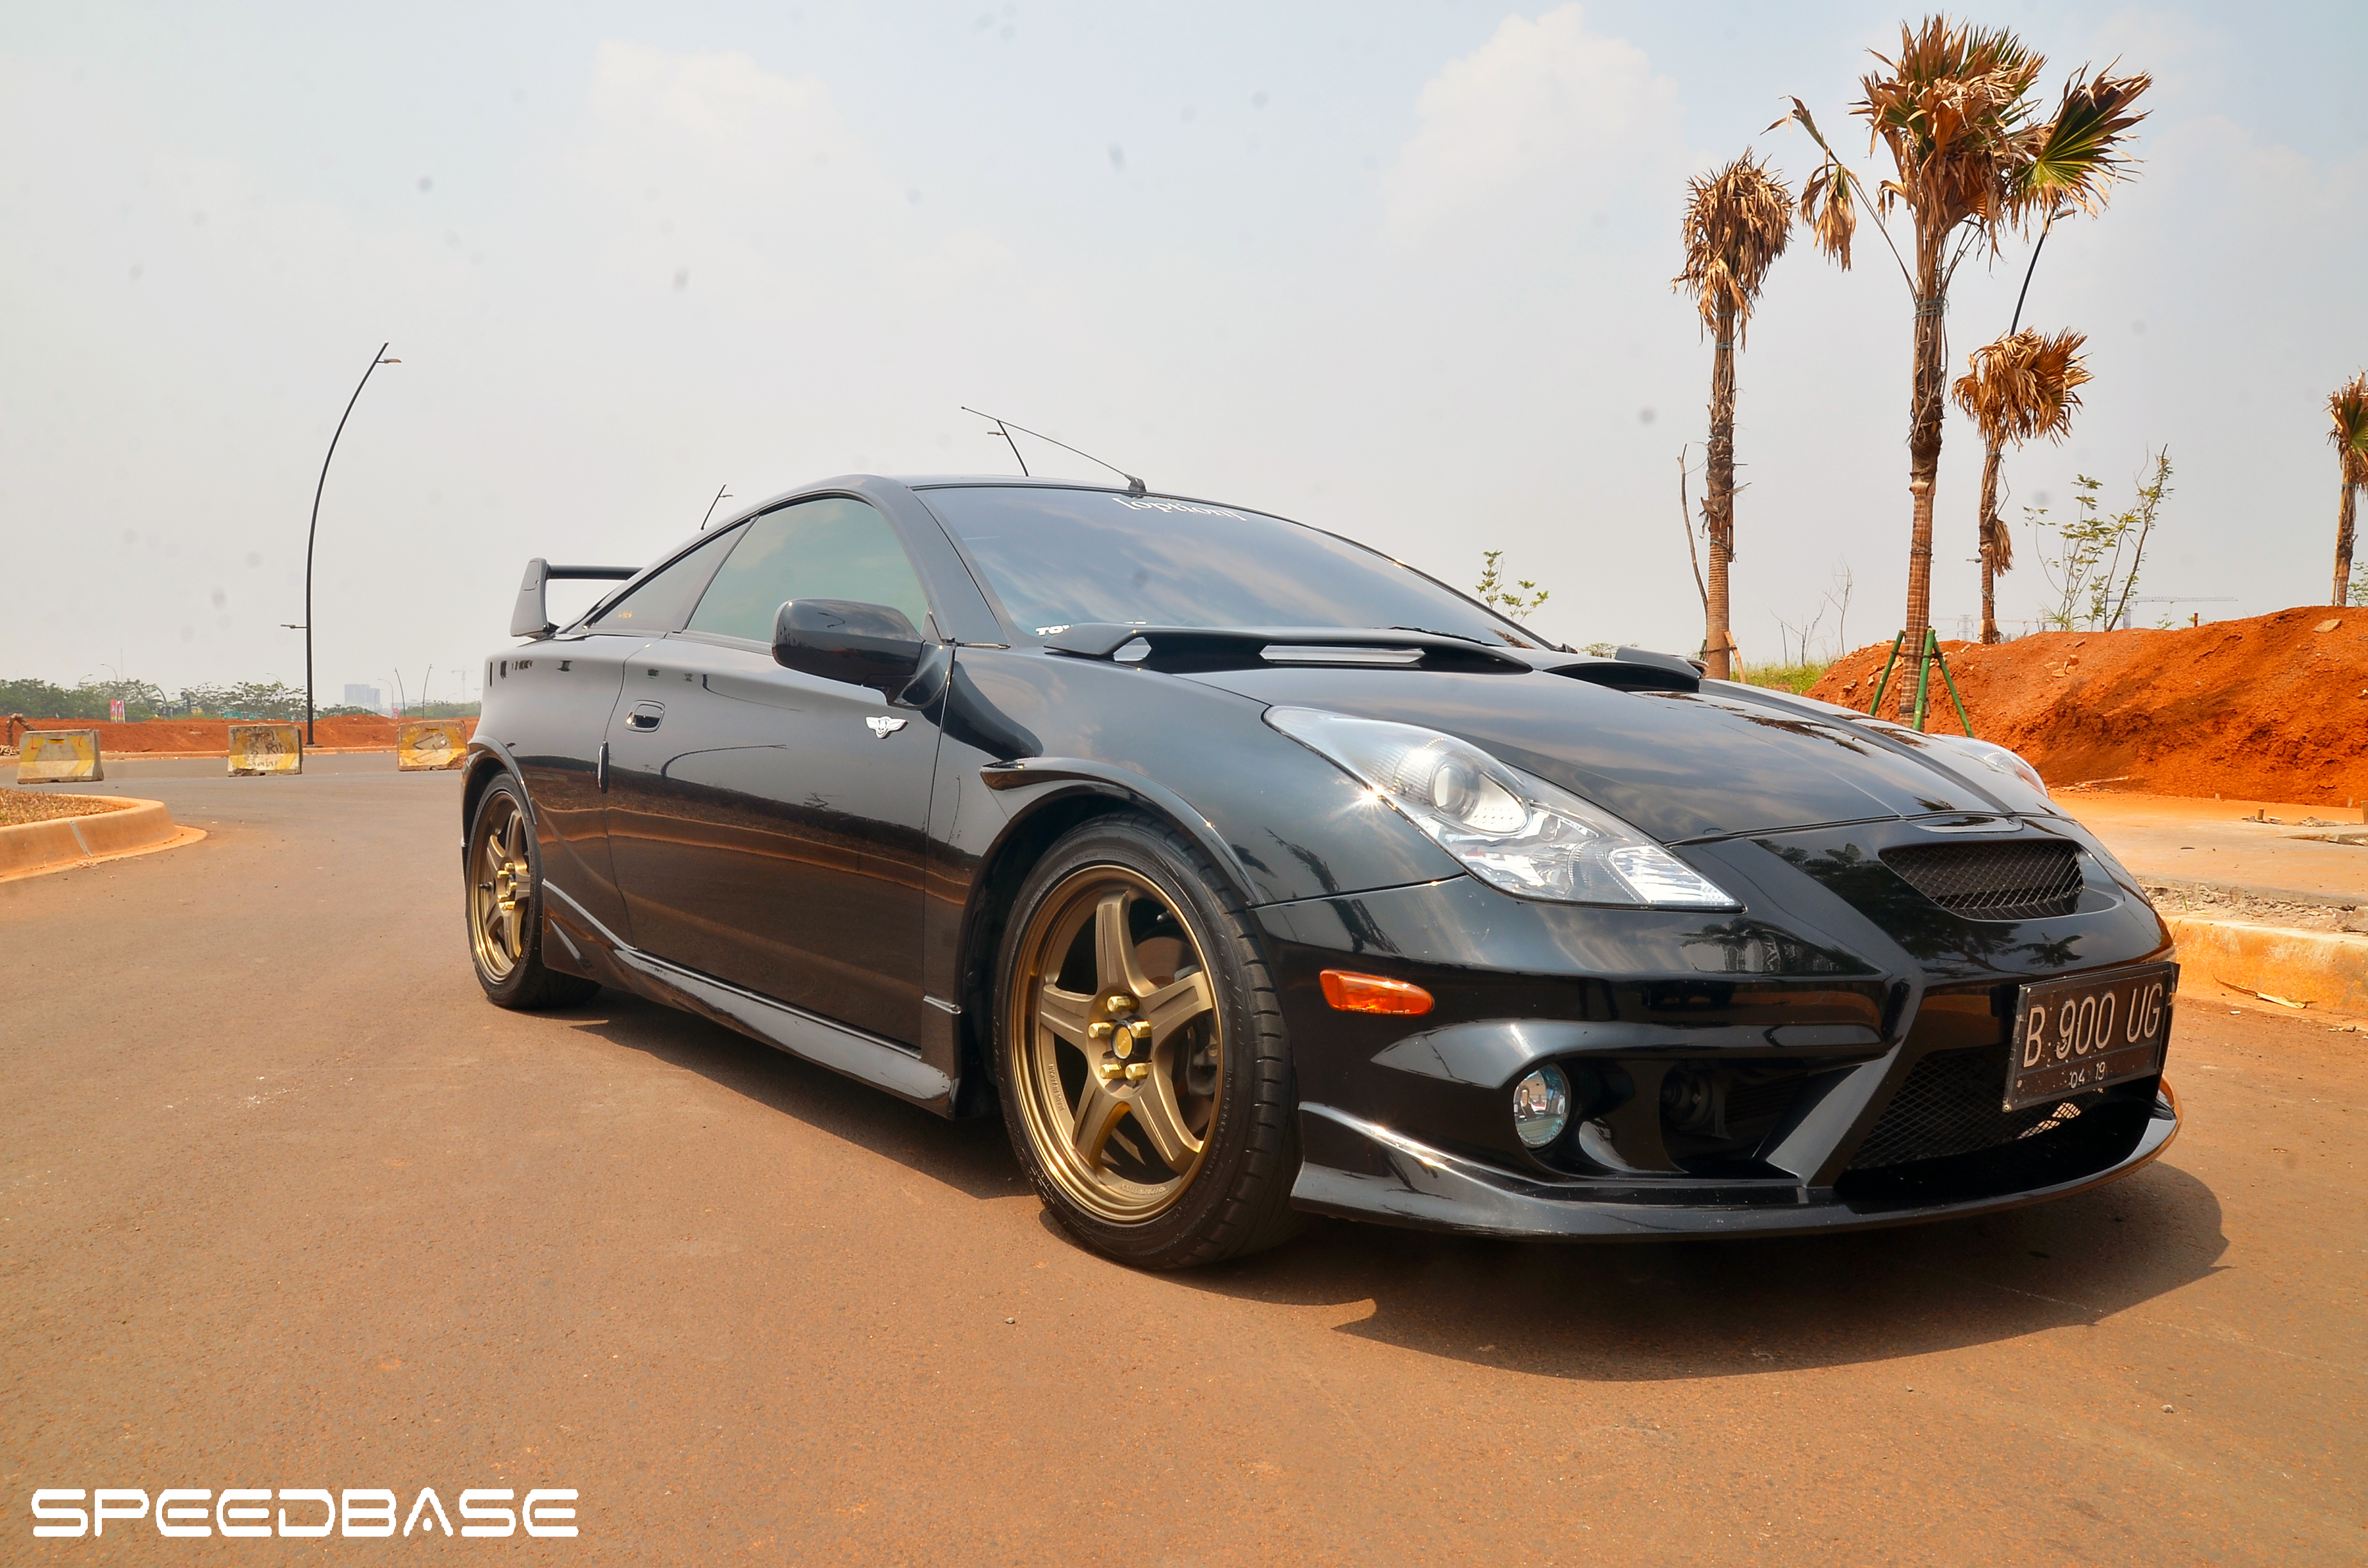 Justins 2004 Toyota Celica TRD Never Look Old MOVED TO